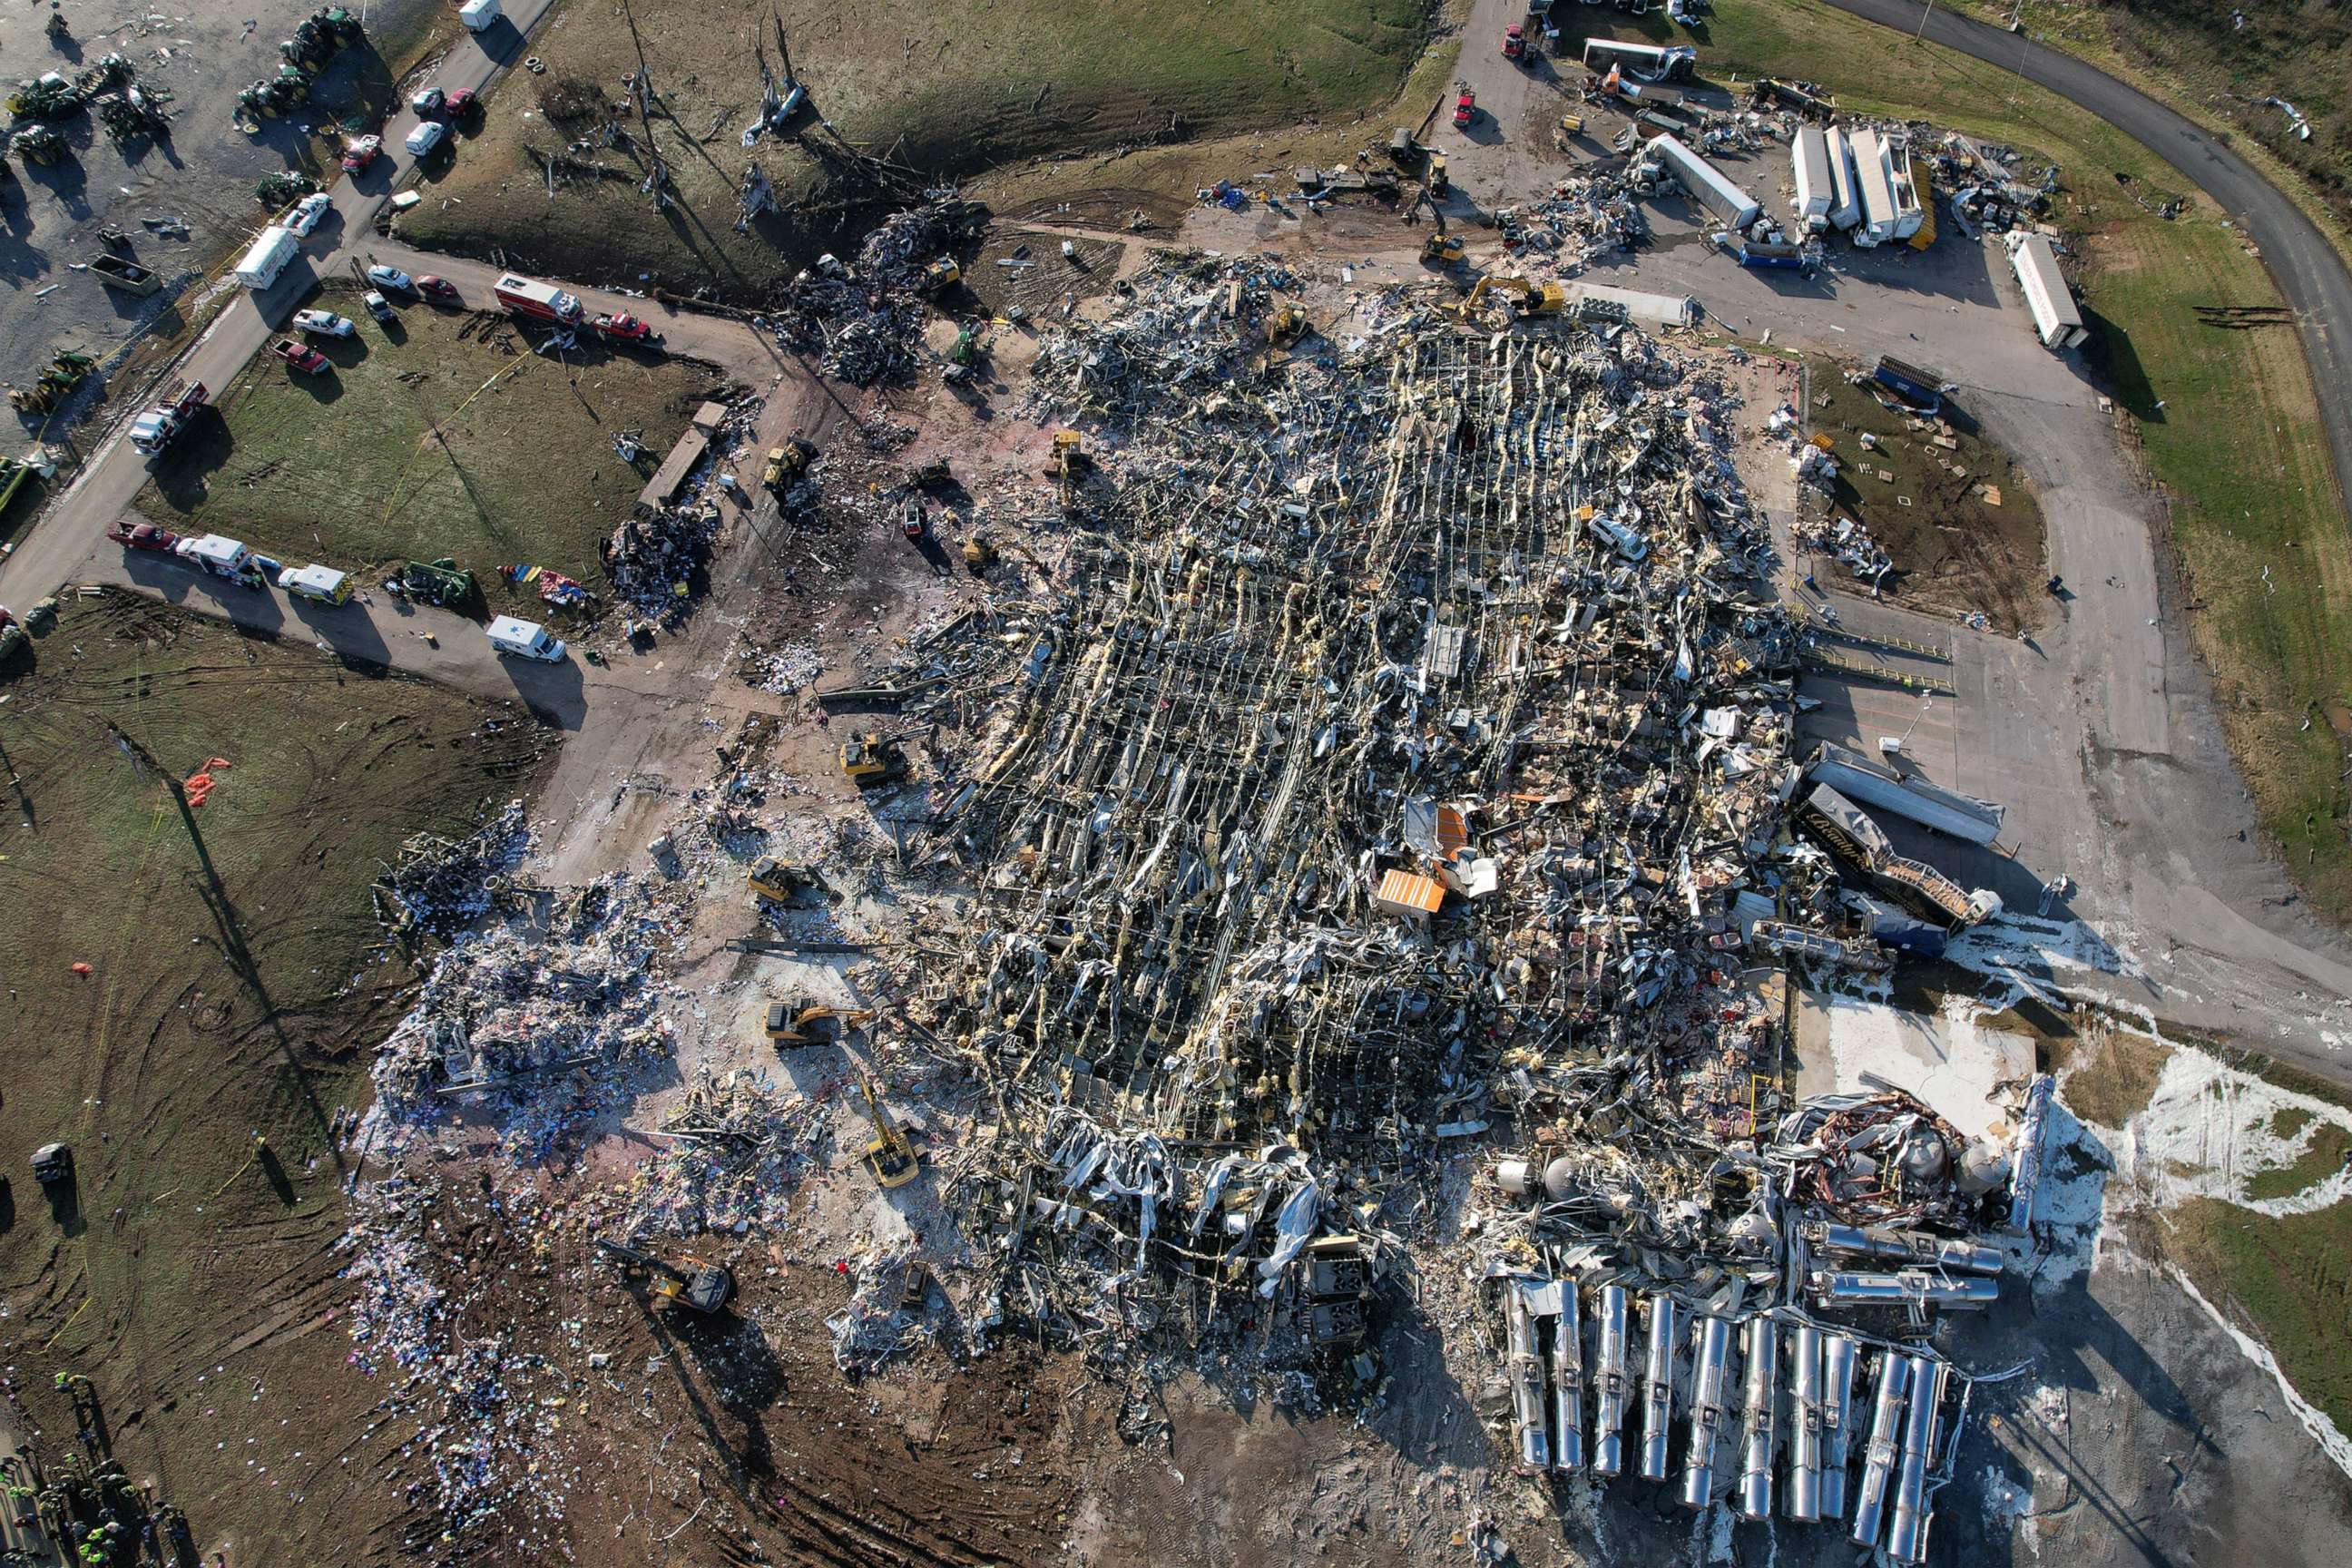 PHOTO: An aerial view of the damage to the candle factory after a devastating outbreak of tornadoes ripped through several states, in Mayfield, Ky., Dec. 11, 2021.